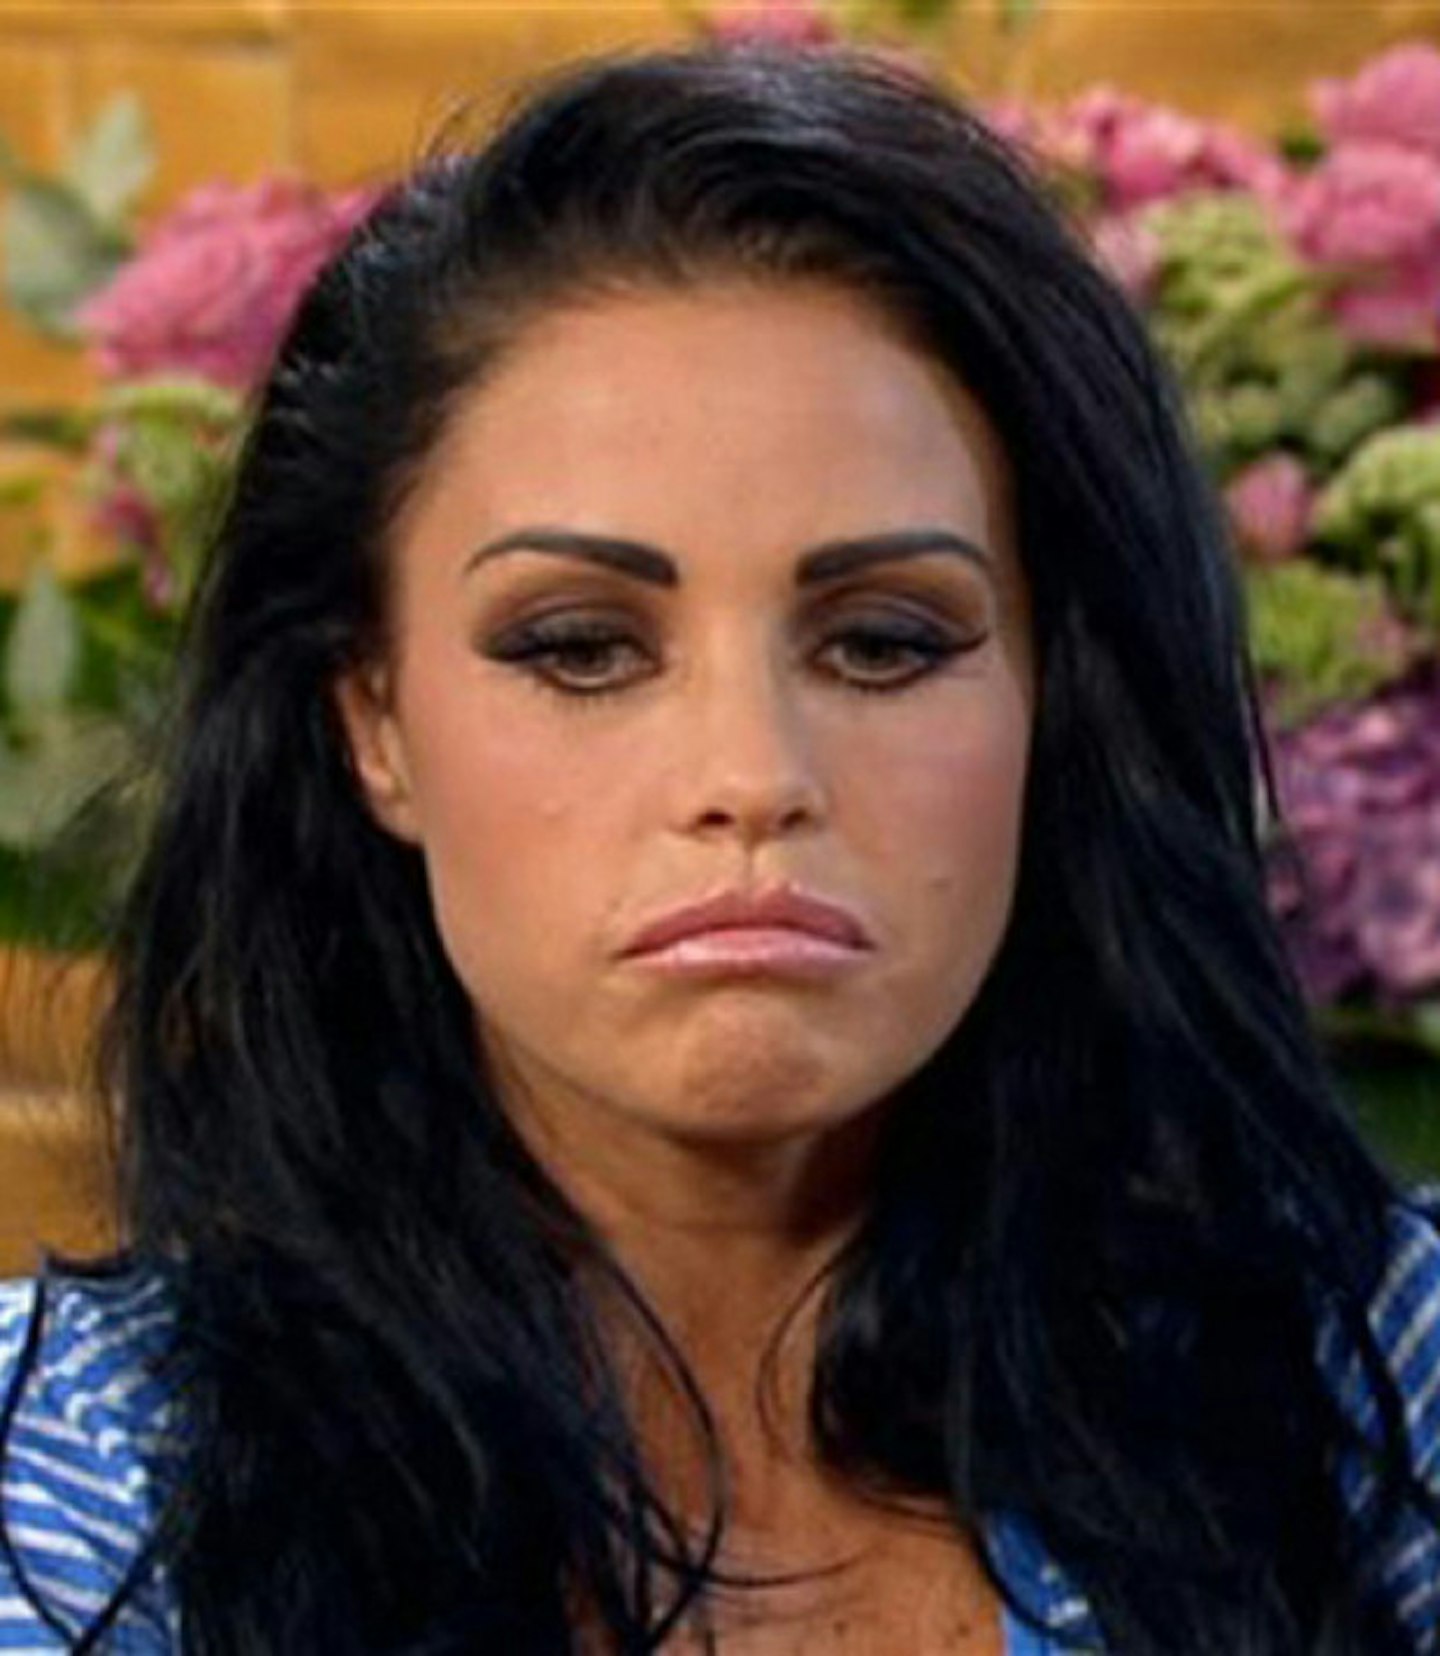 Katie Price: 27th July 2010